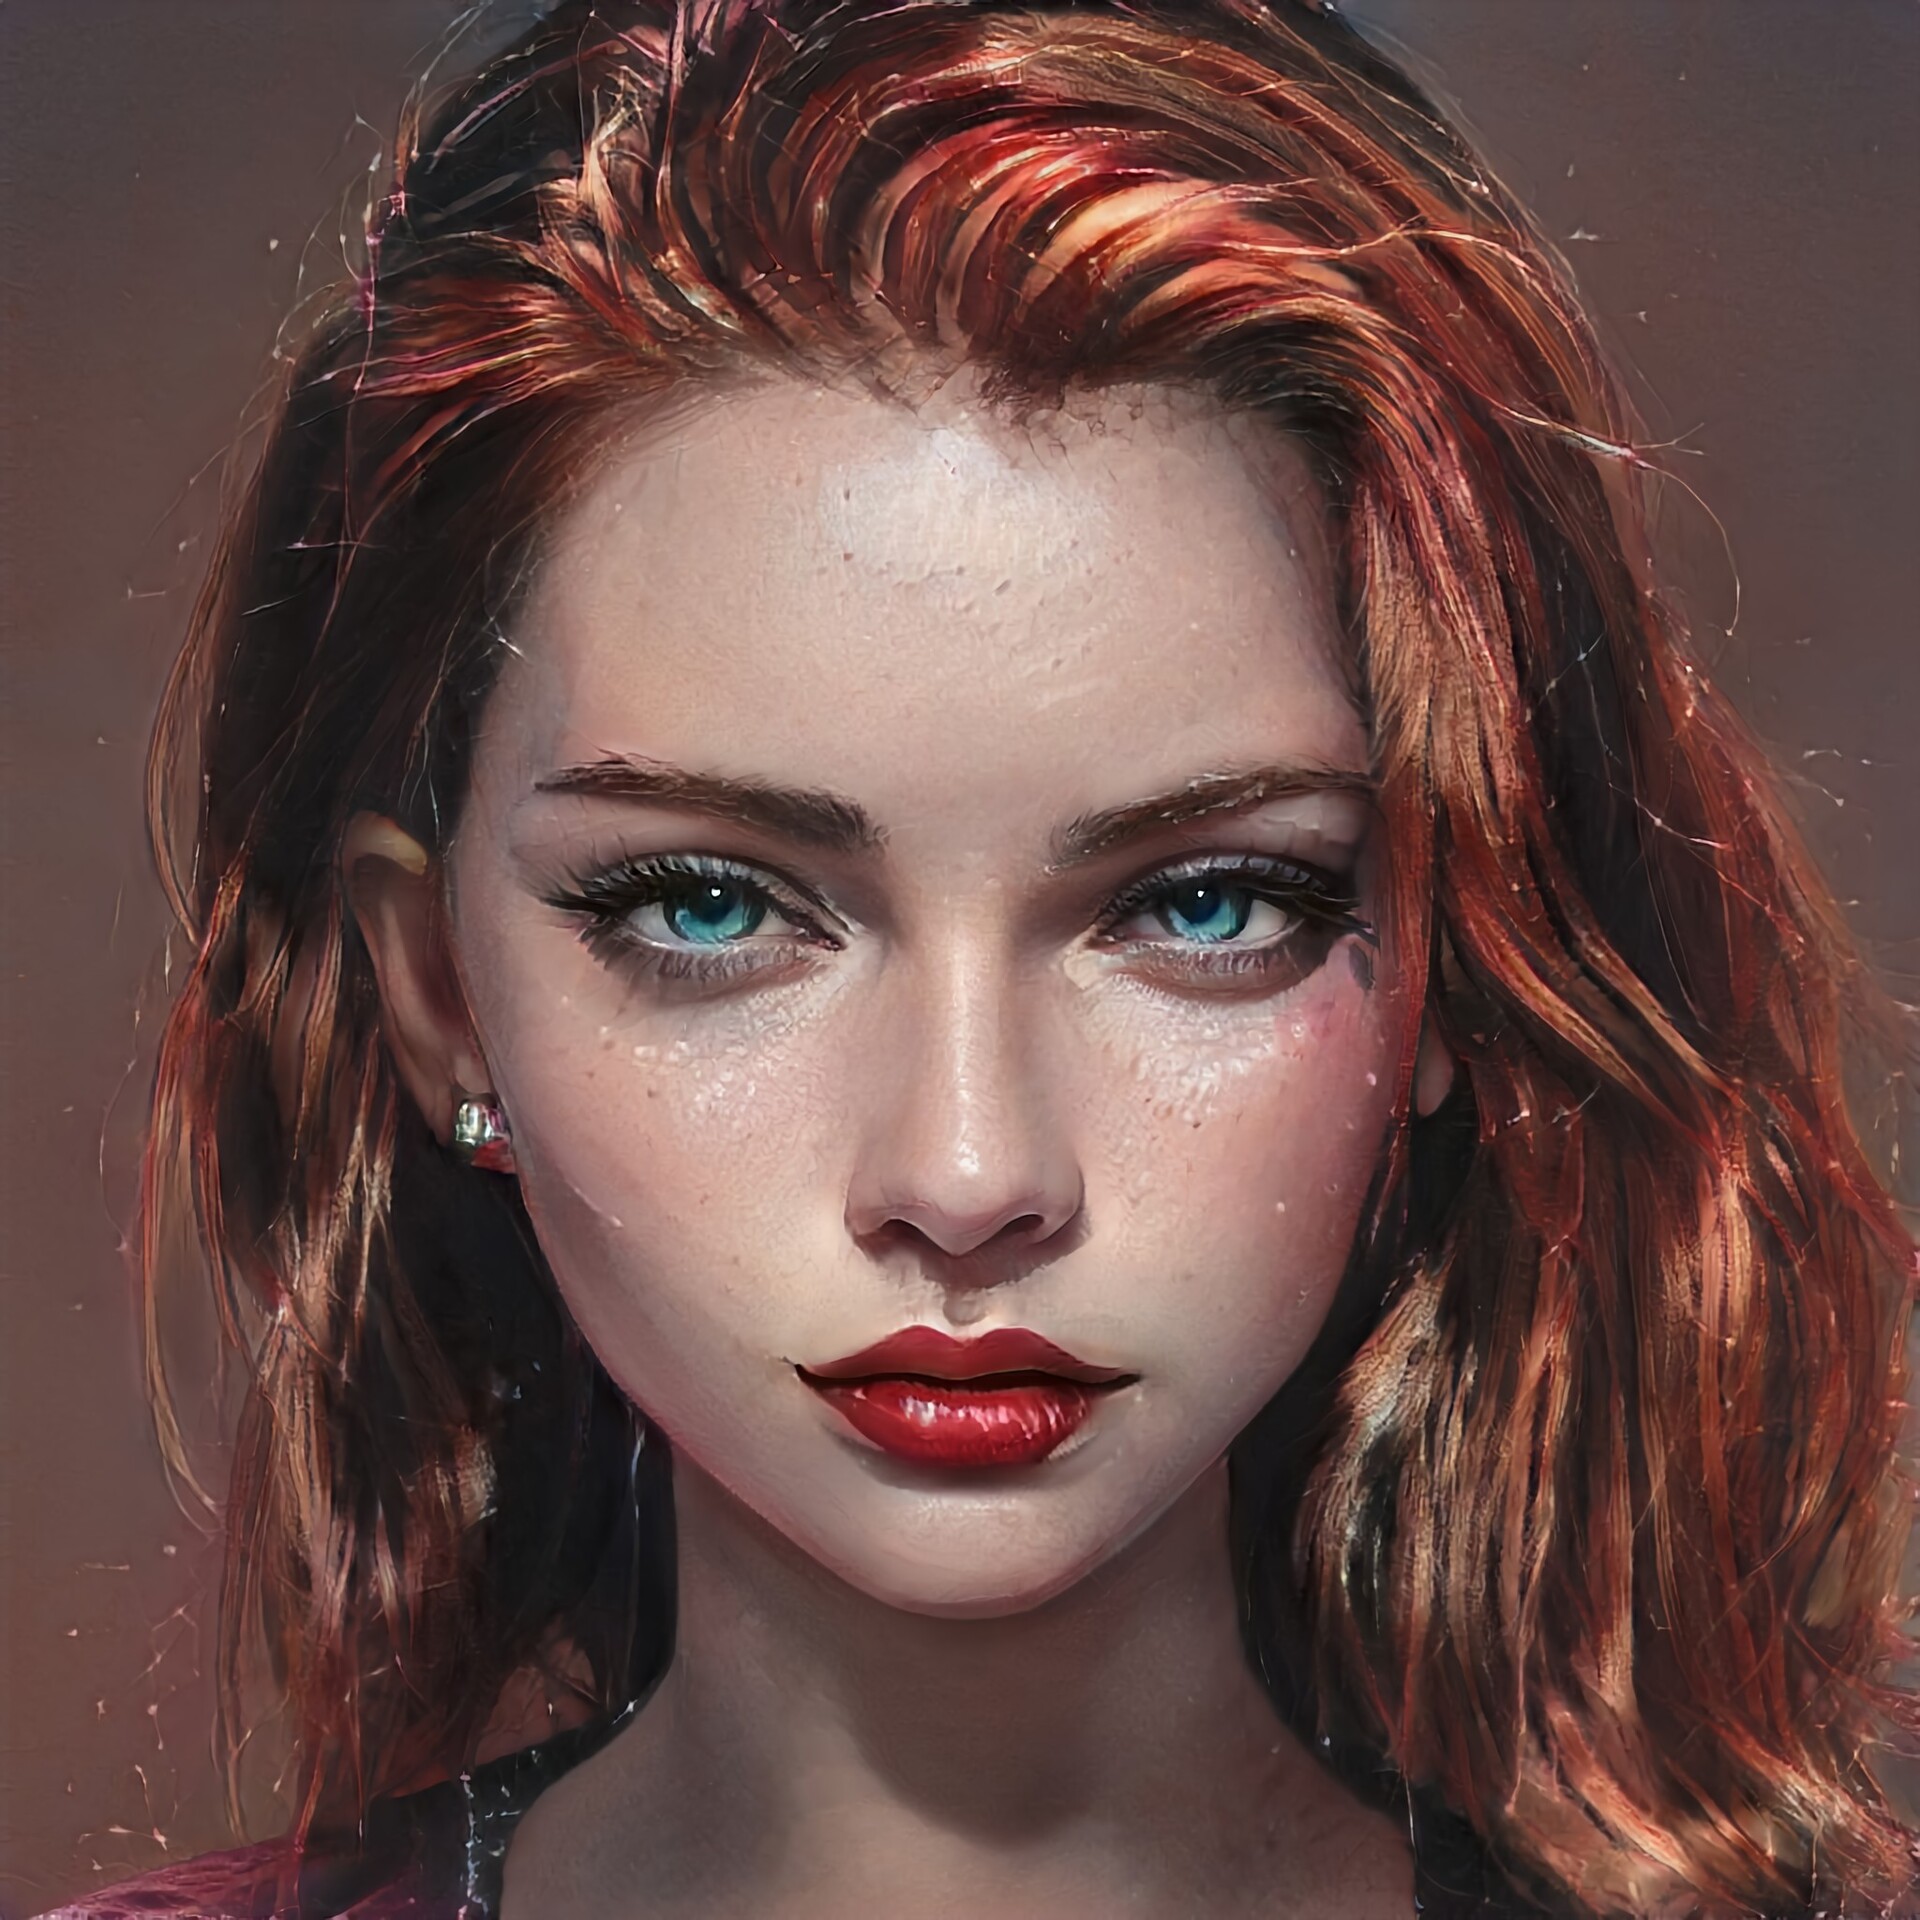 ArtStation - The Lady with the Fiery Hair